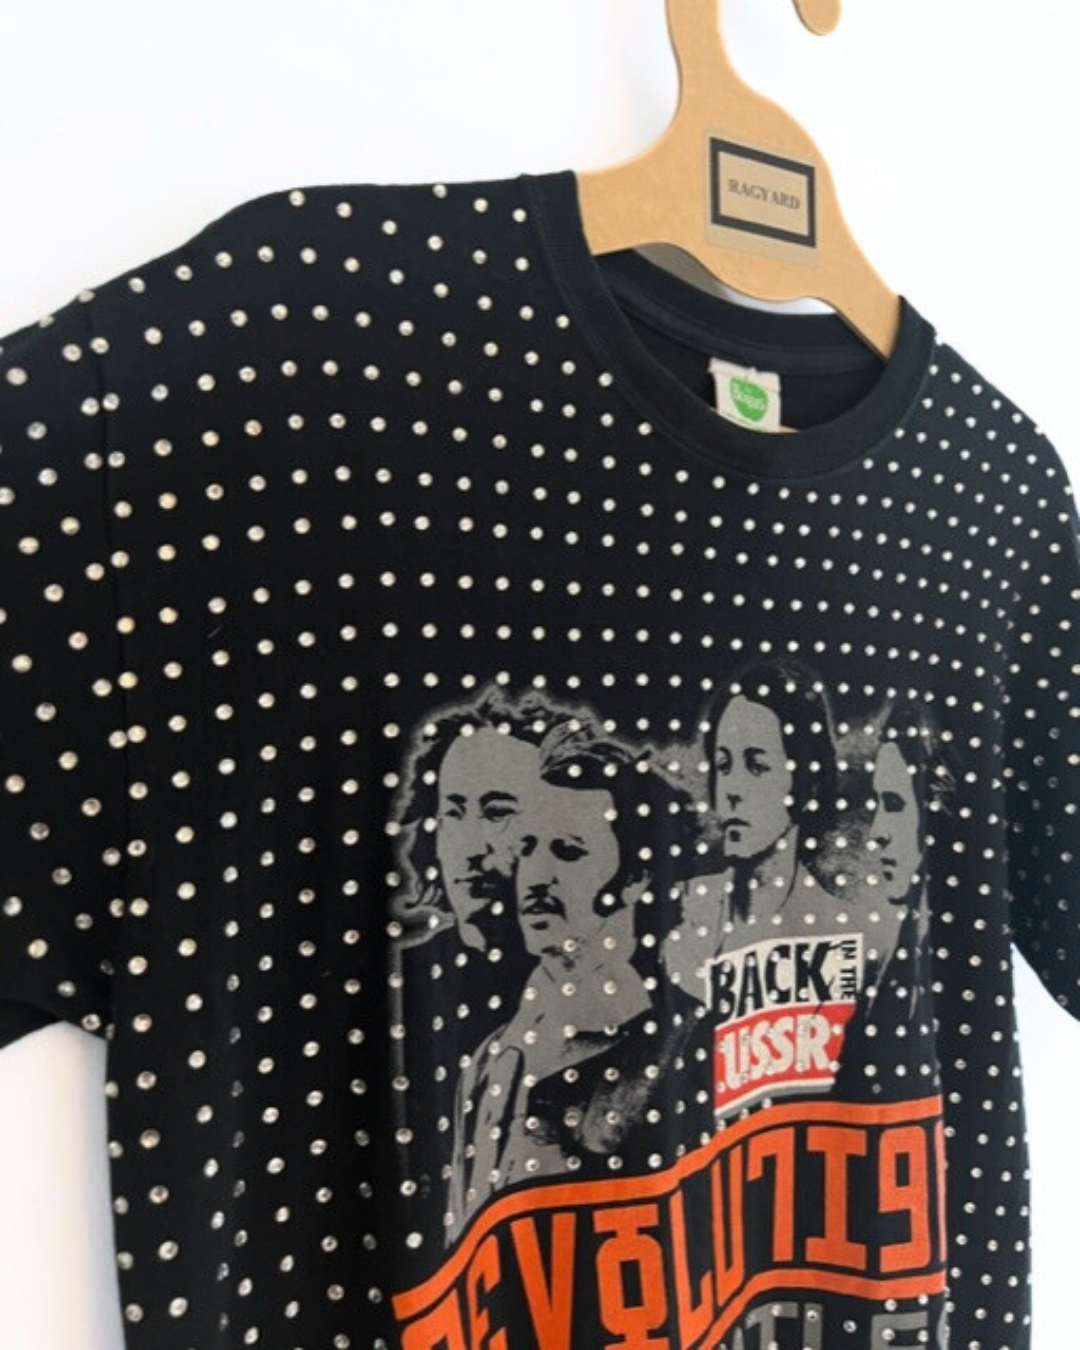 Vintage Black BEATLES T-shirt with all over diamante studs